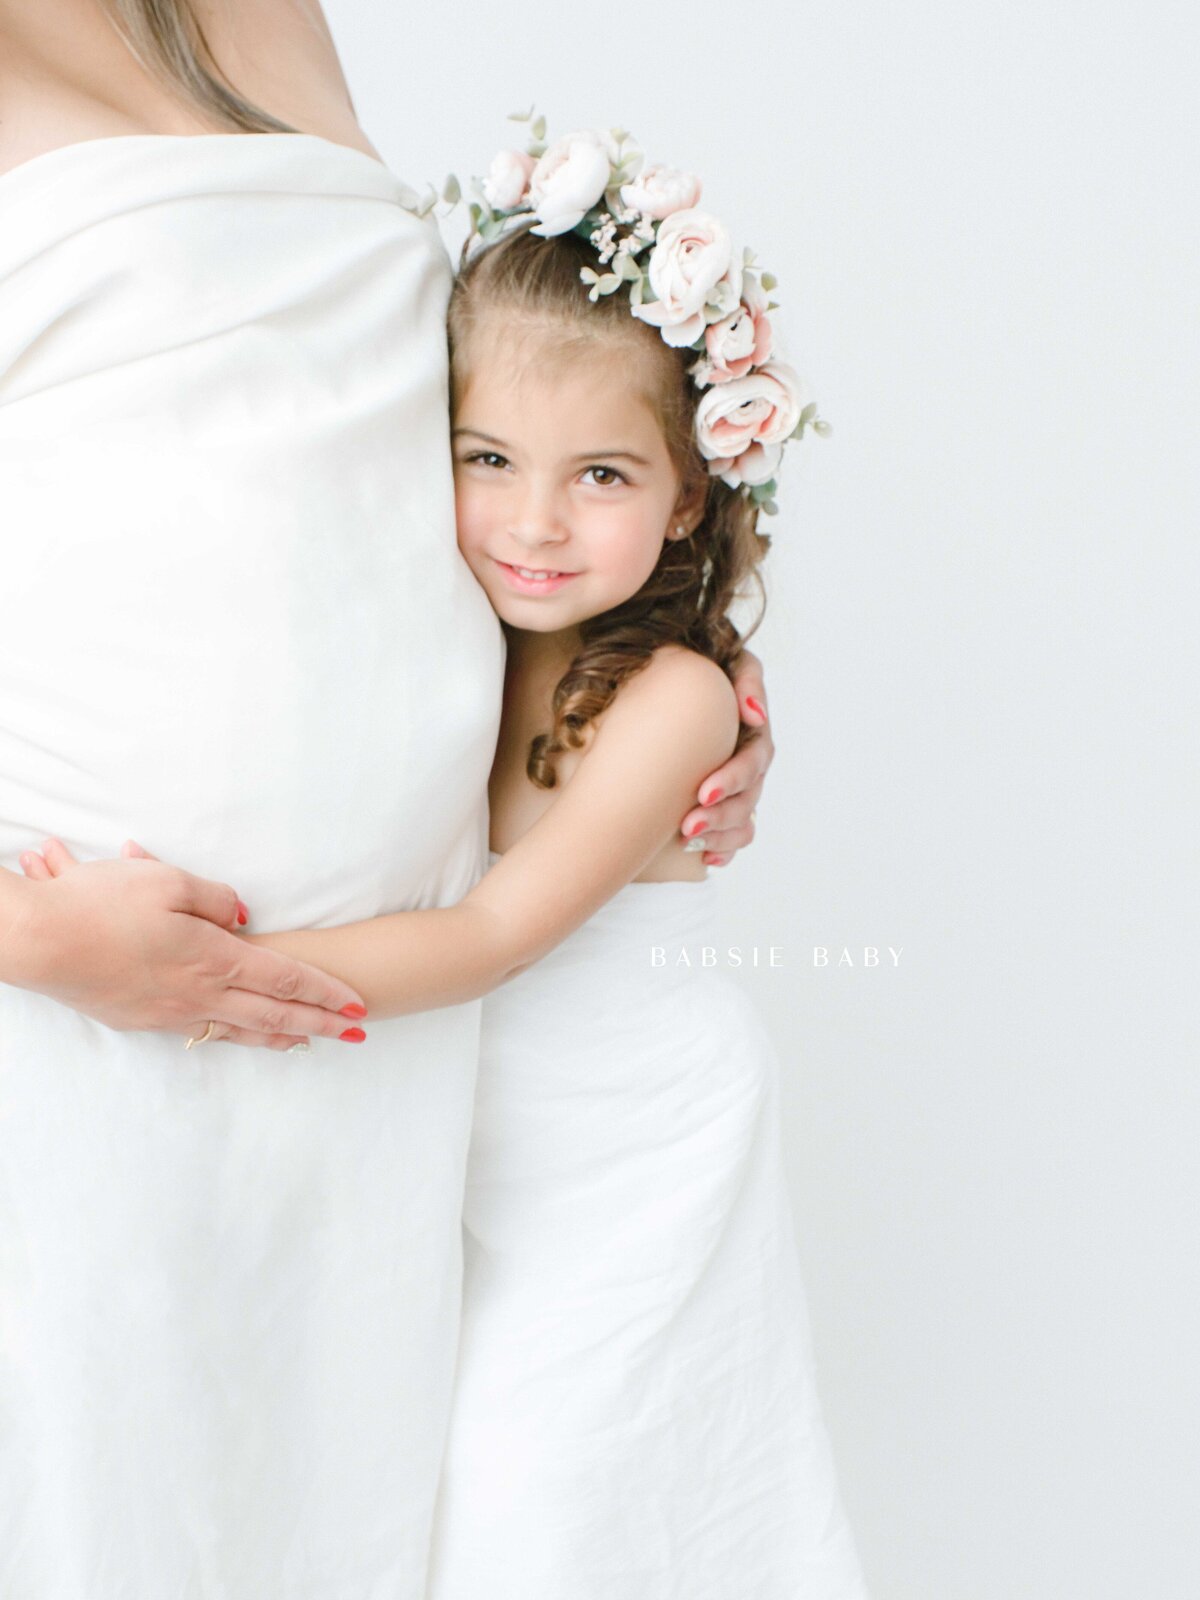 light-and-airy-daughter-mother-baby-san-diego-photo-studio-2020